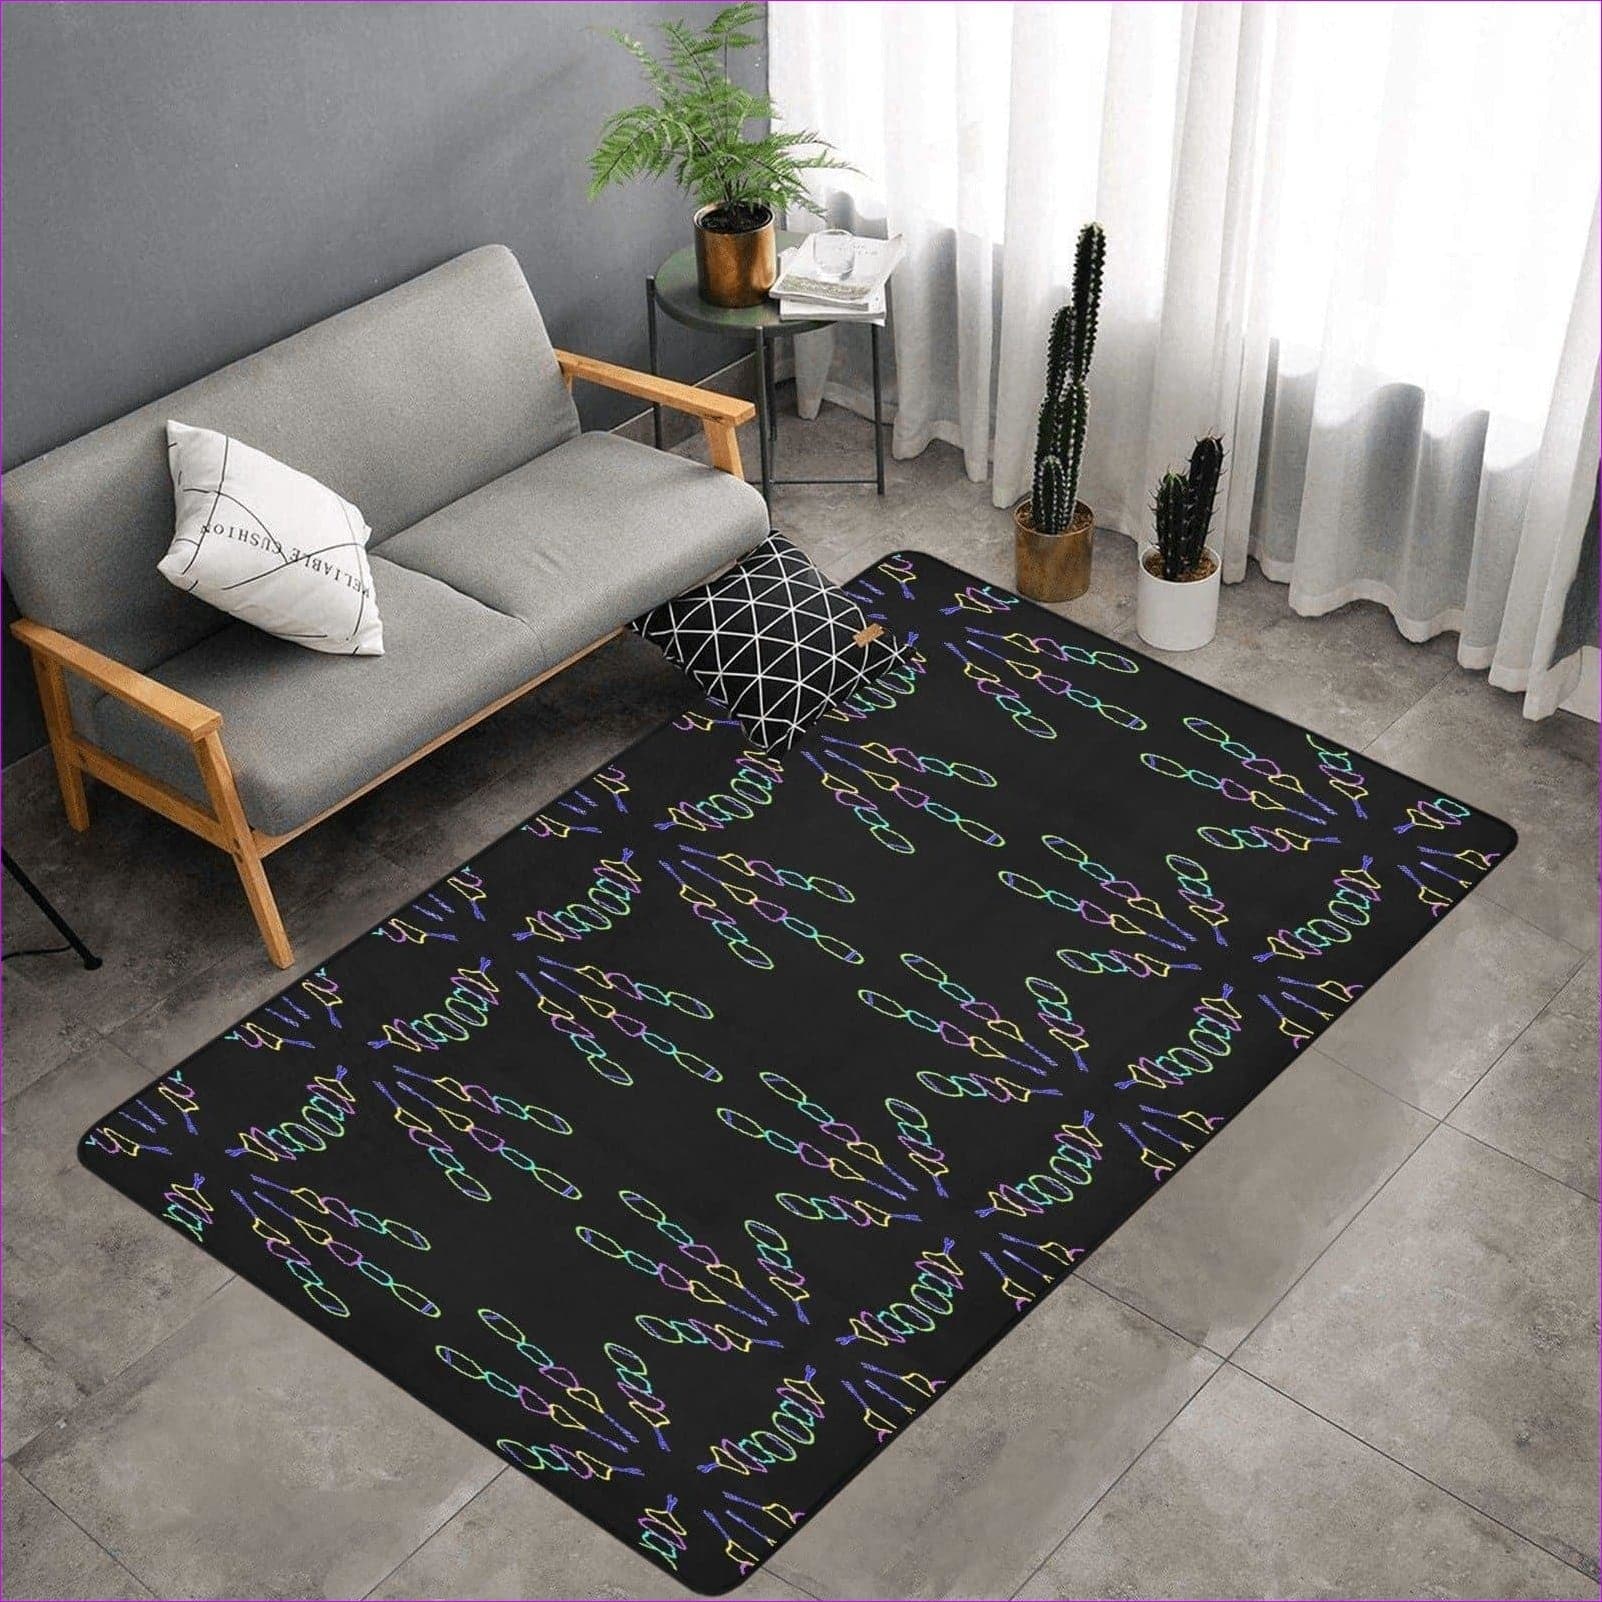 One Size Mandala Black Area Rug with Black Binding 7'x5' - Mandala Area Rug with Black Binding 7'x5' - Area Rugs at TFC&H Co.